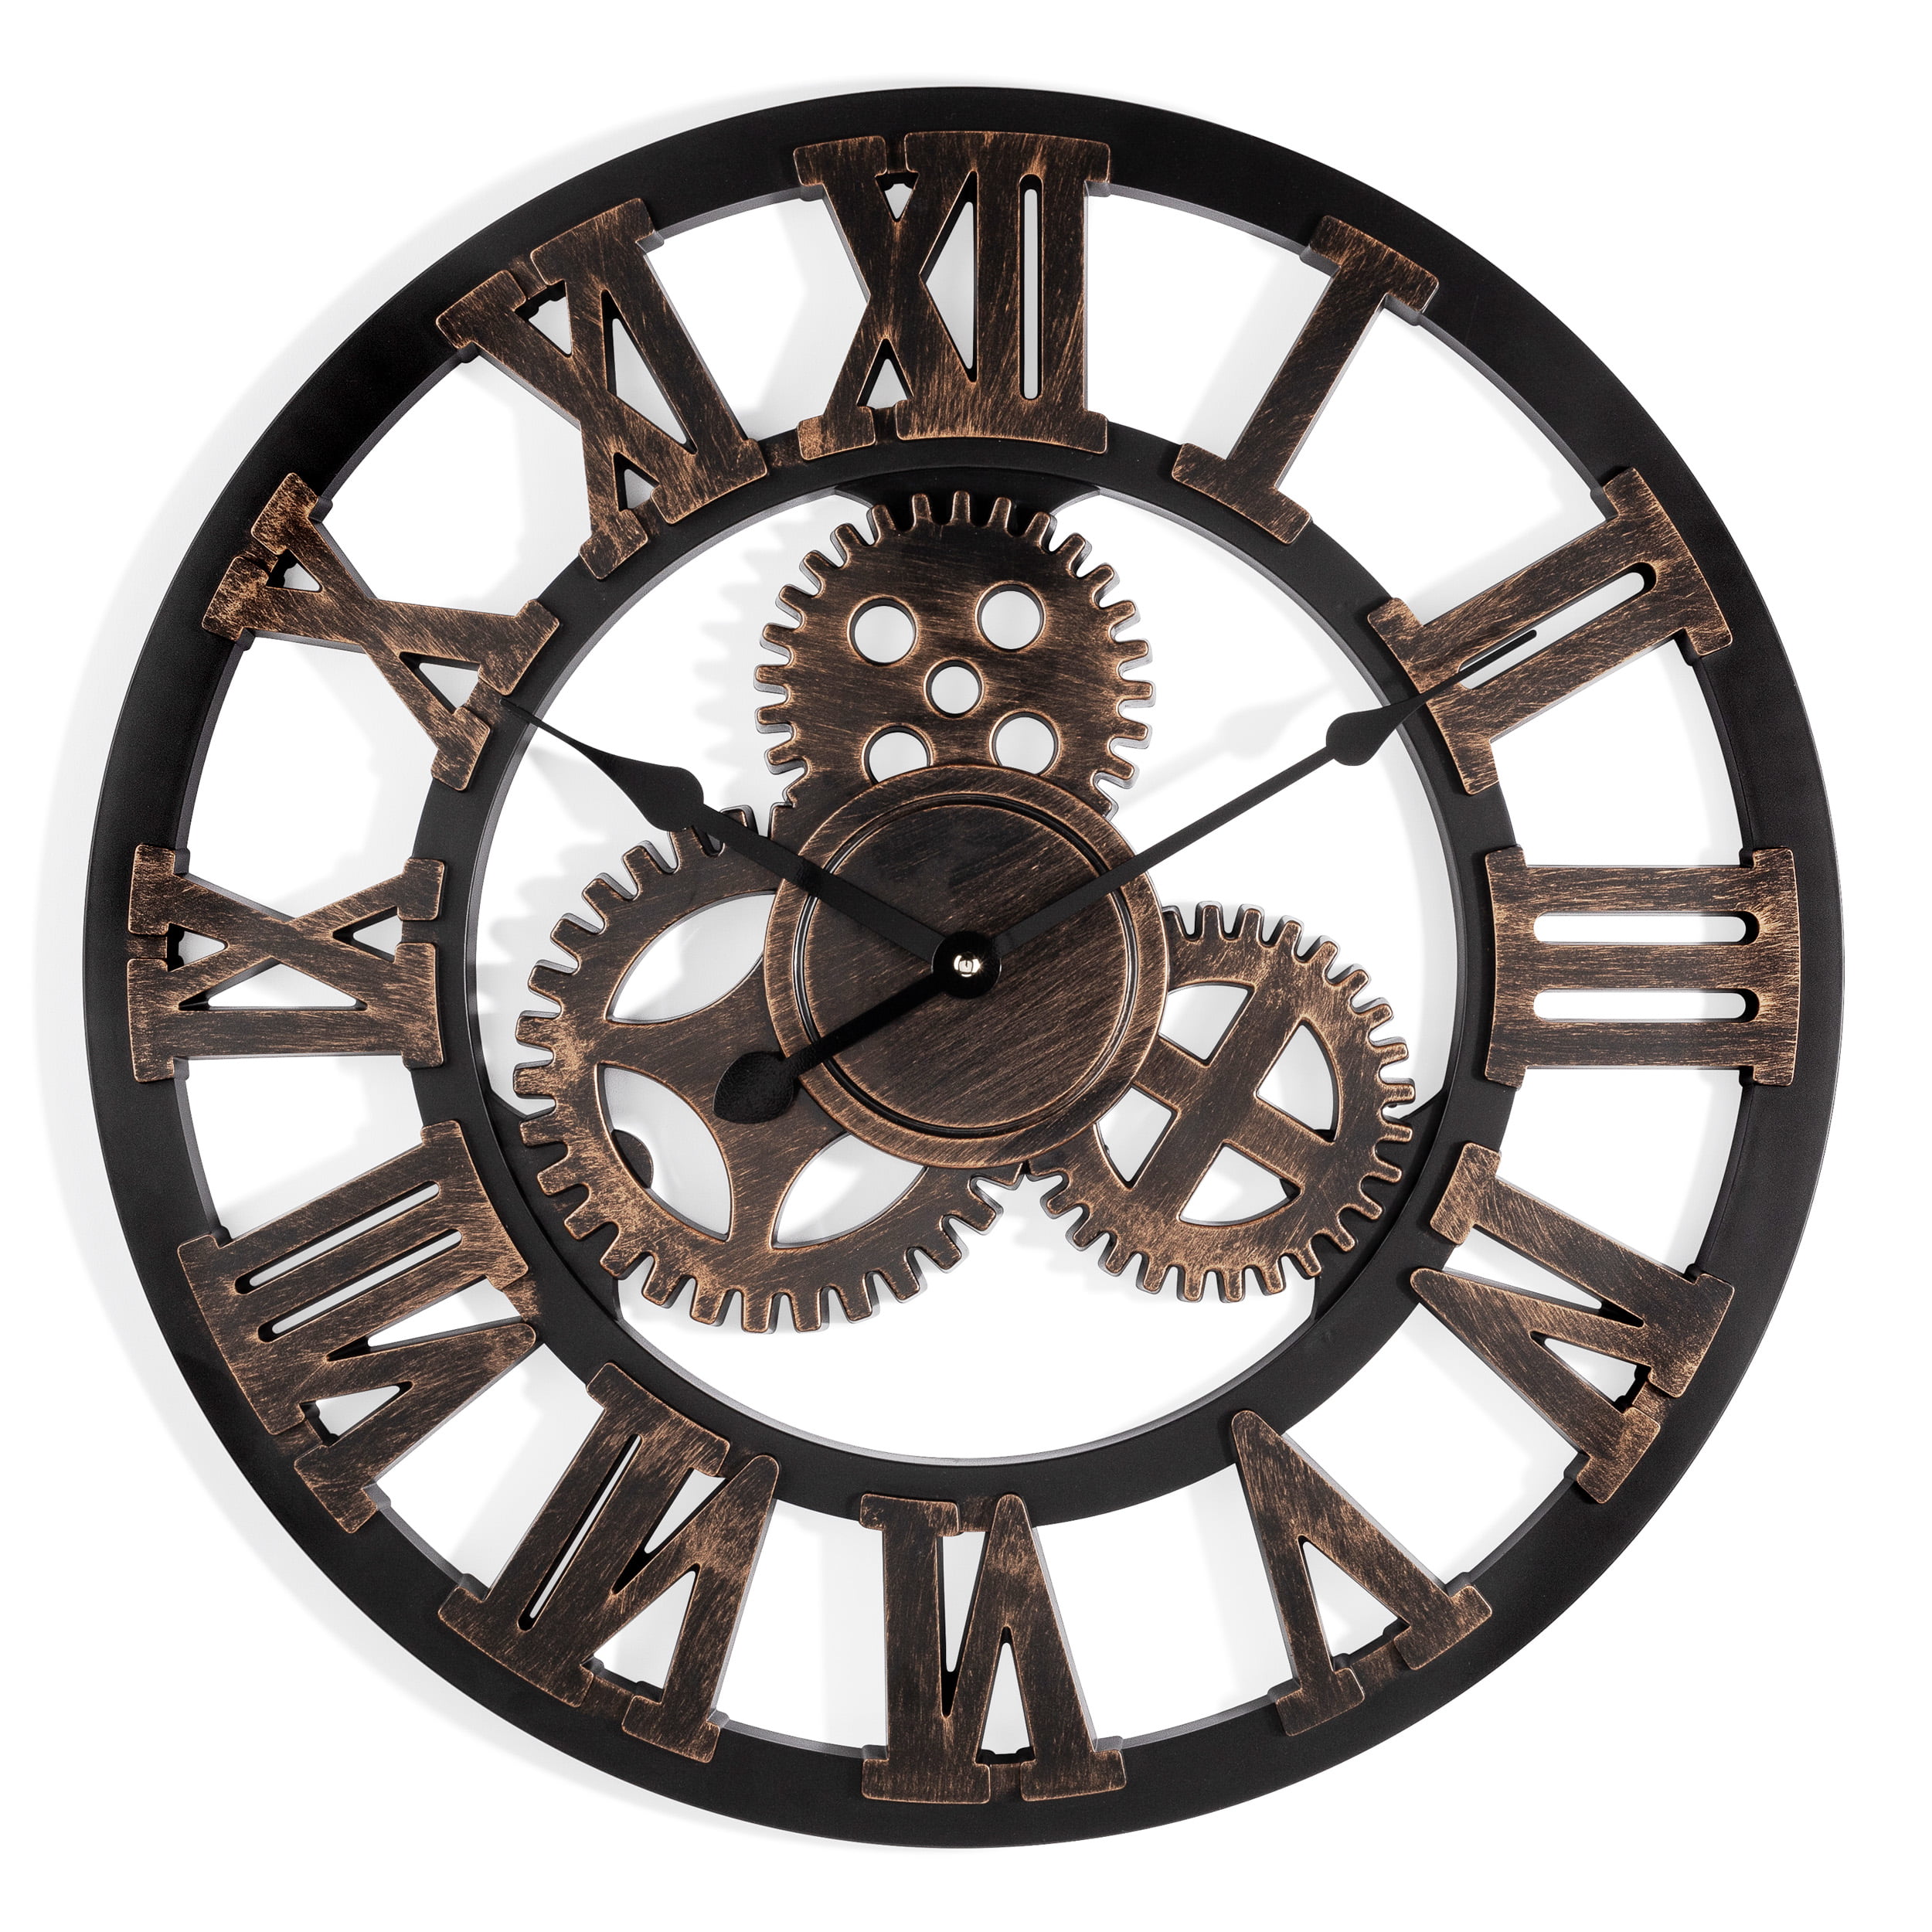 Industrial Retro Wall Clock Large 12" 16 inch Round 3D Gear Roman Numeral Decor 